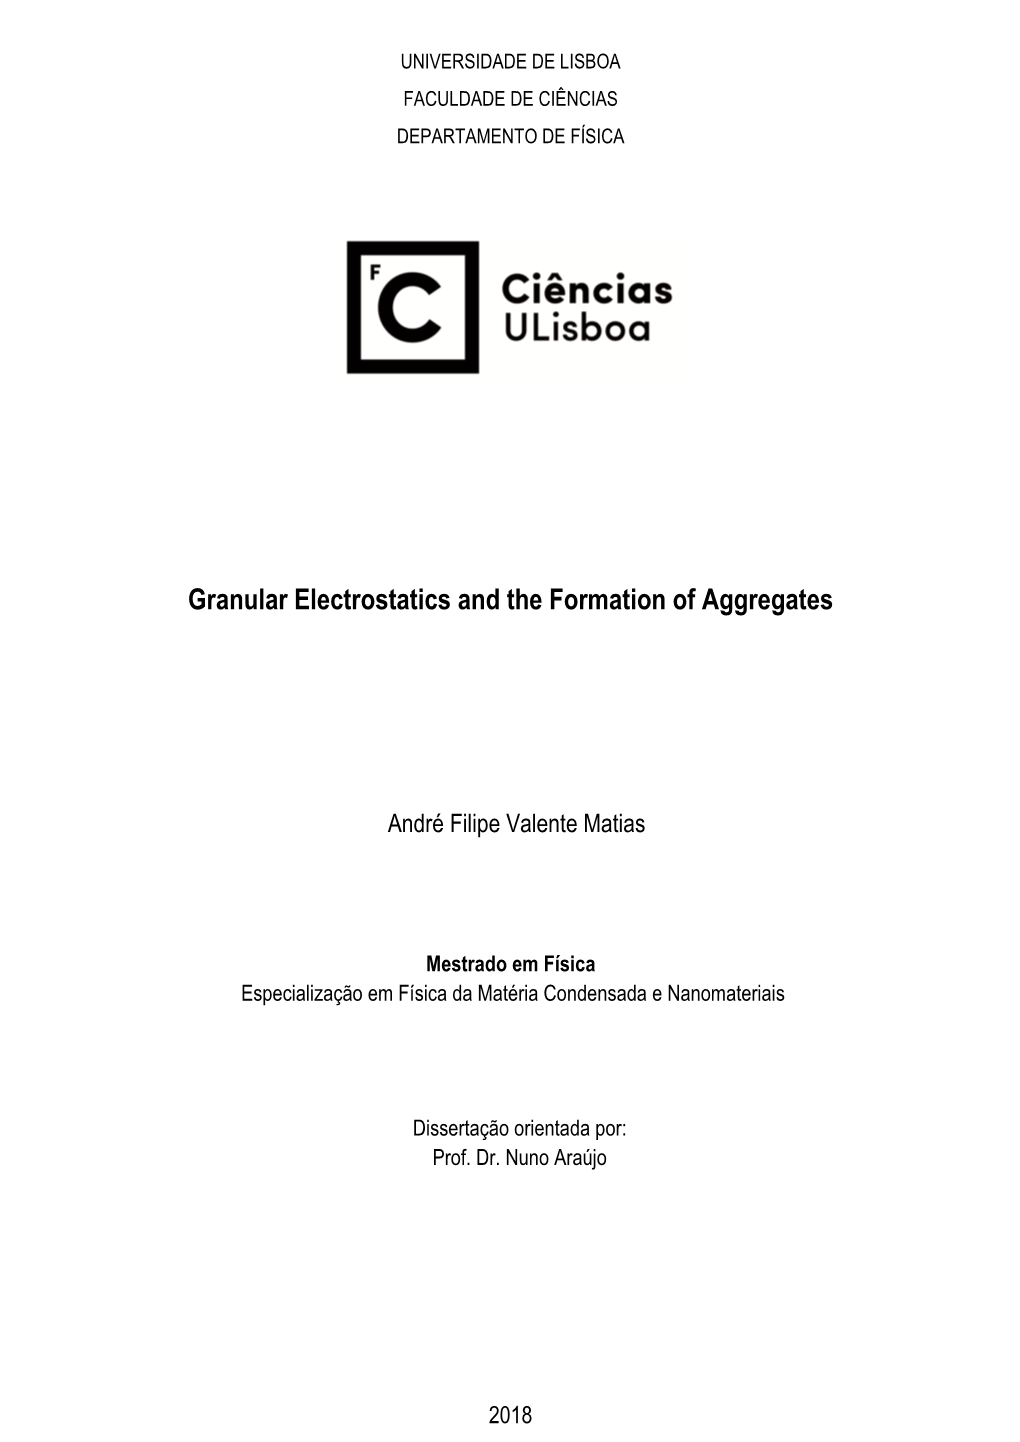 Granular Electrostatics and the Formation of Aggregates